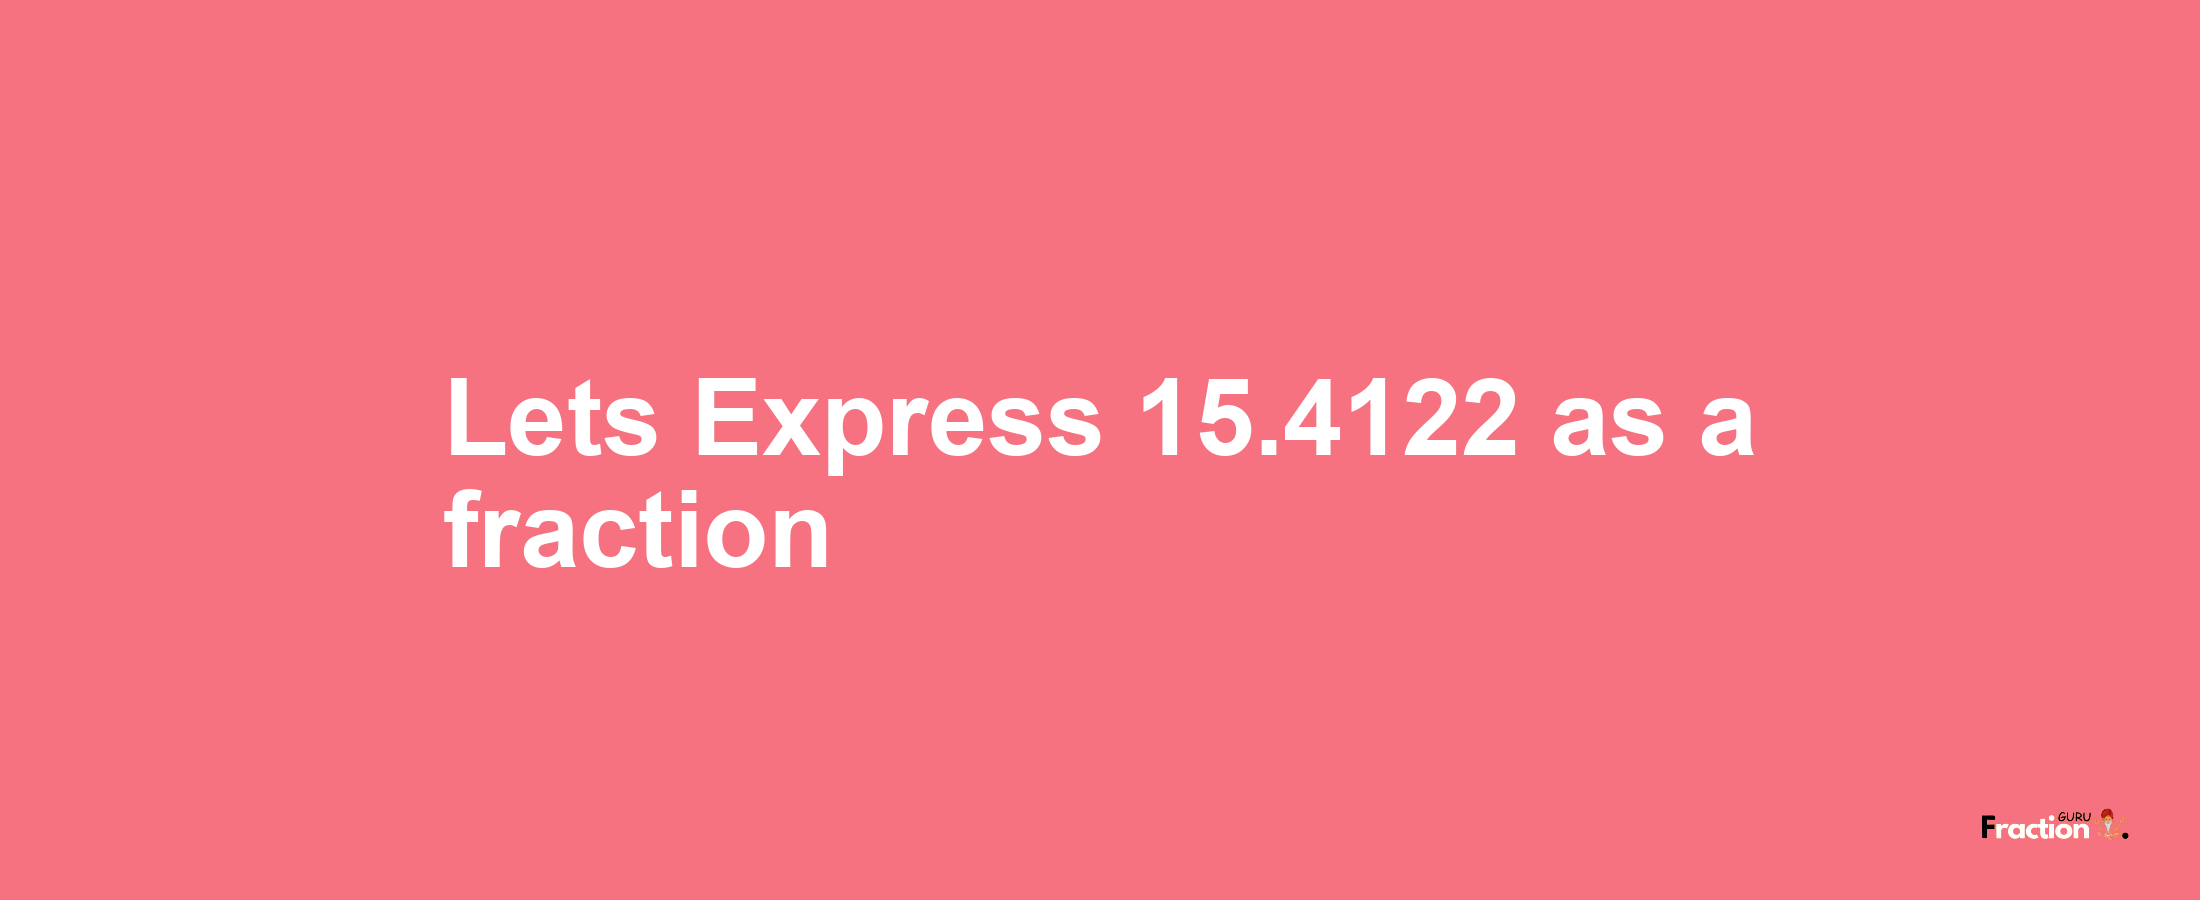 Lets Express 15.4122 as afraction